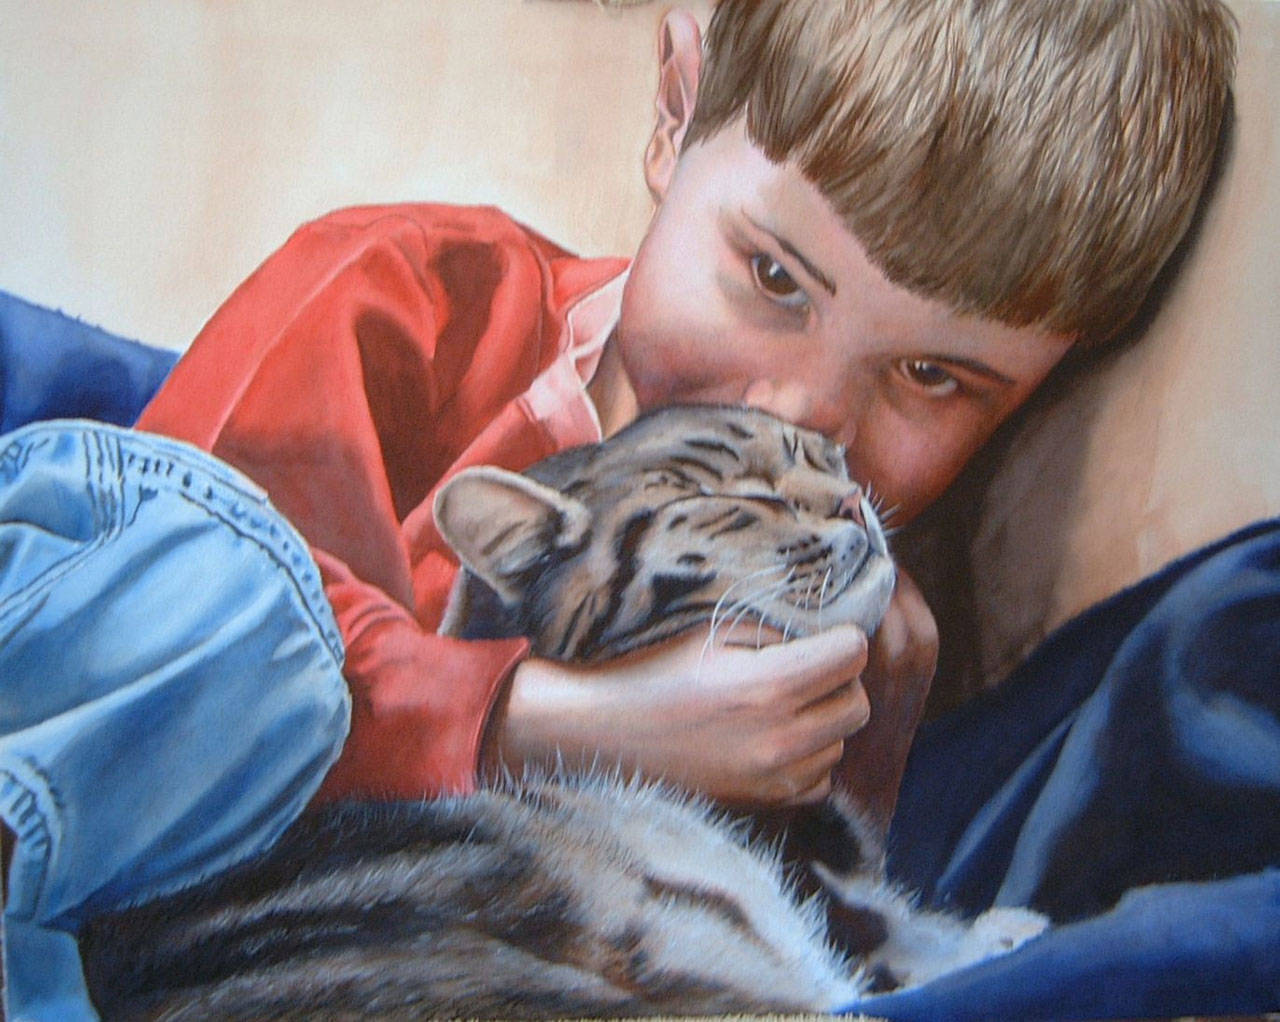 “Adam & Sprocket” by Sally Cays, a featured artist this August at the Blue Whole Gallery.